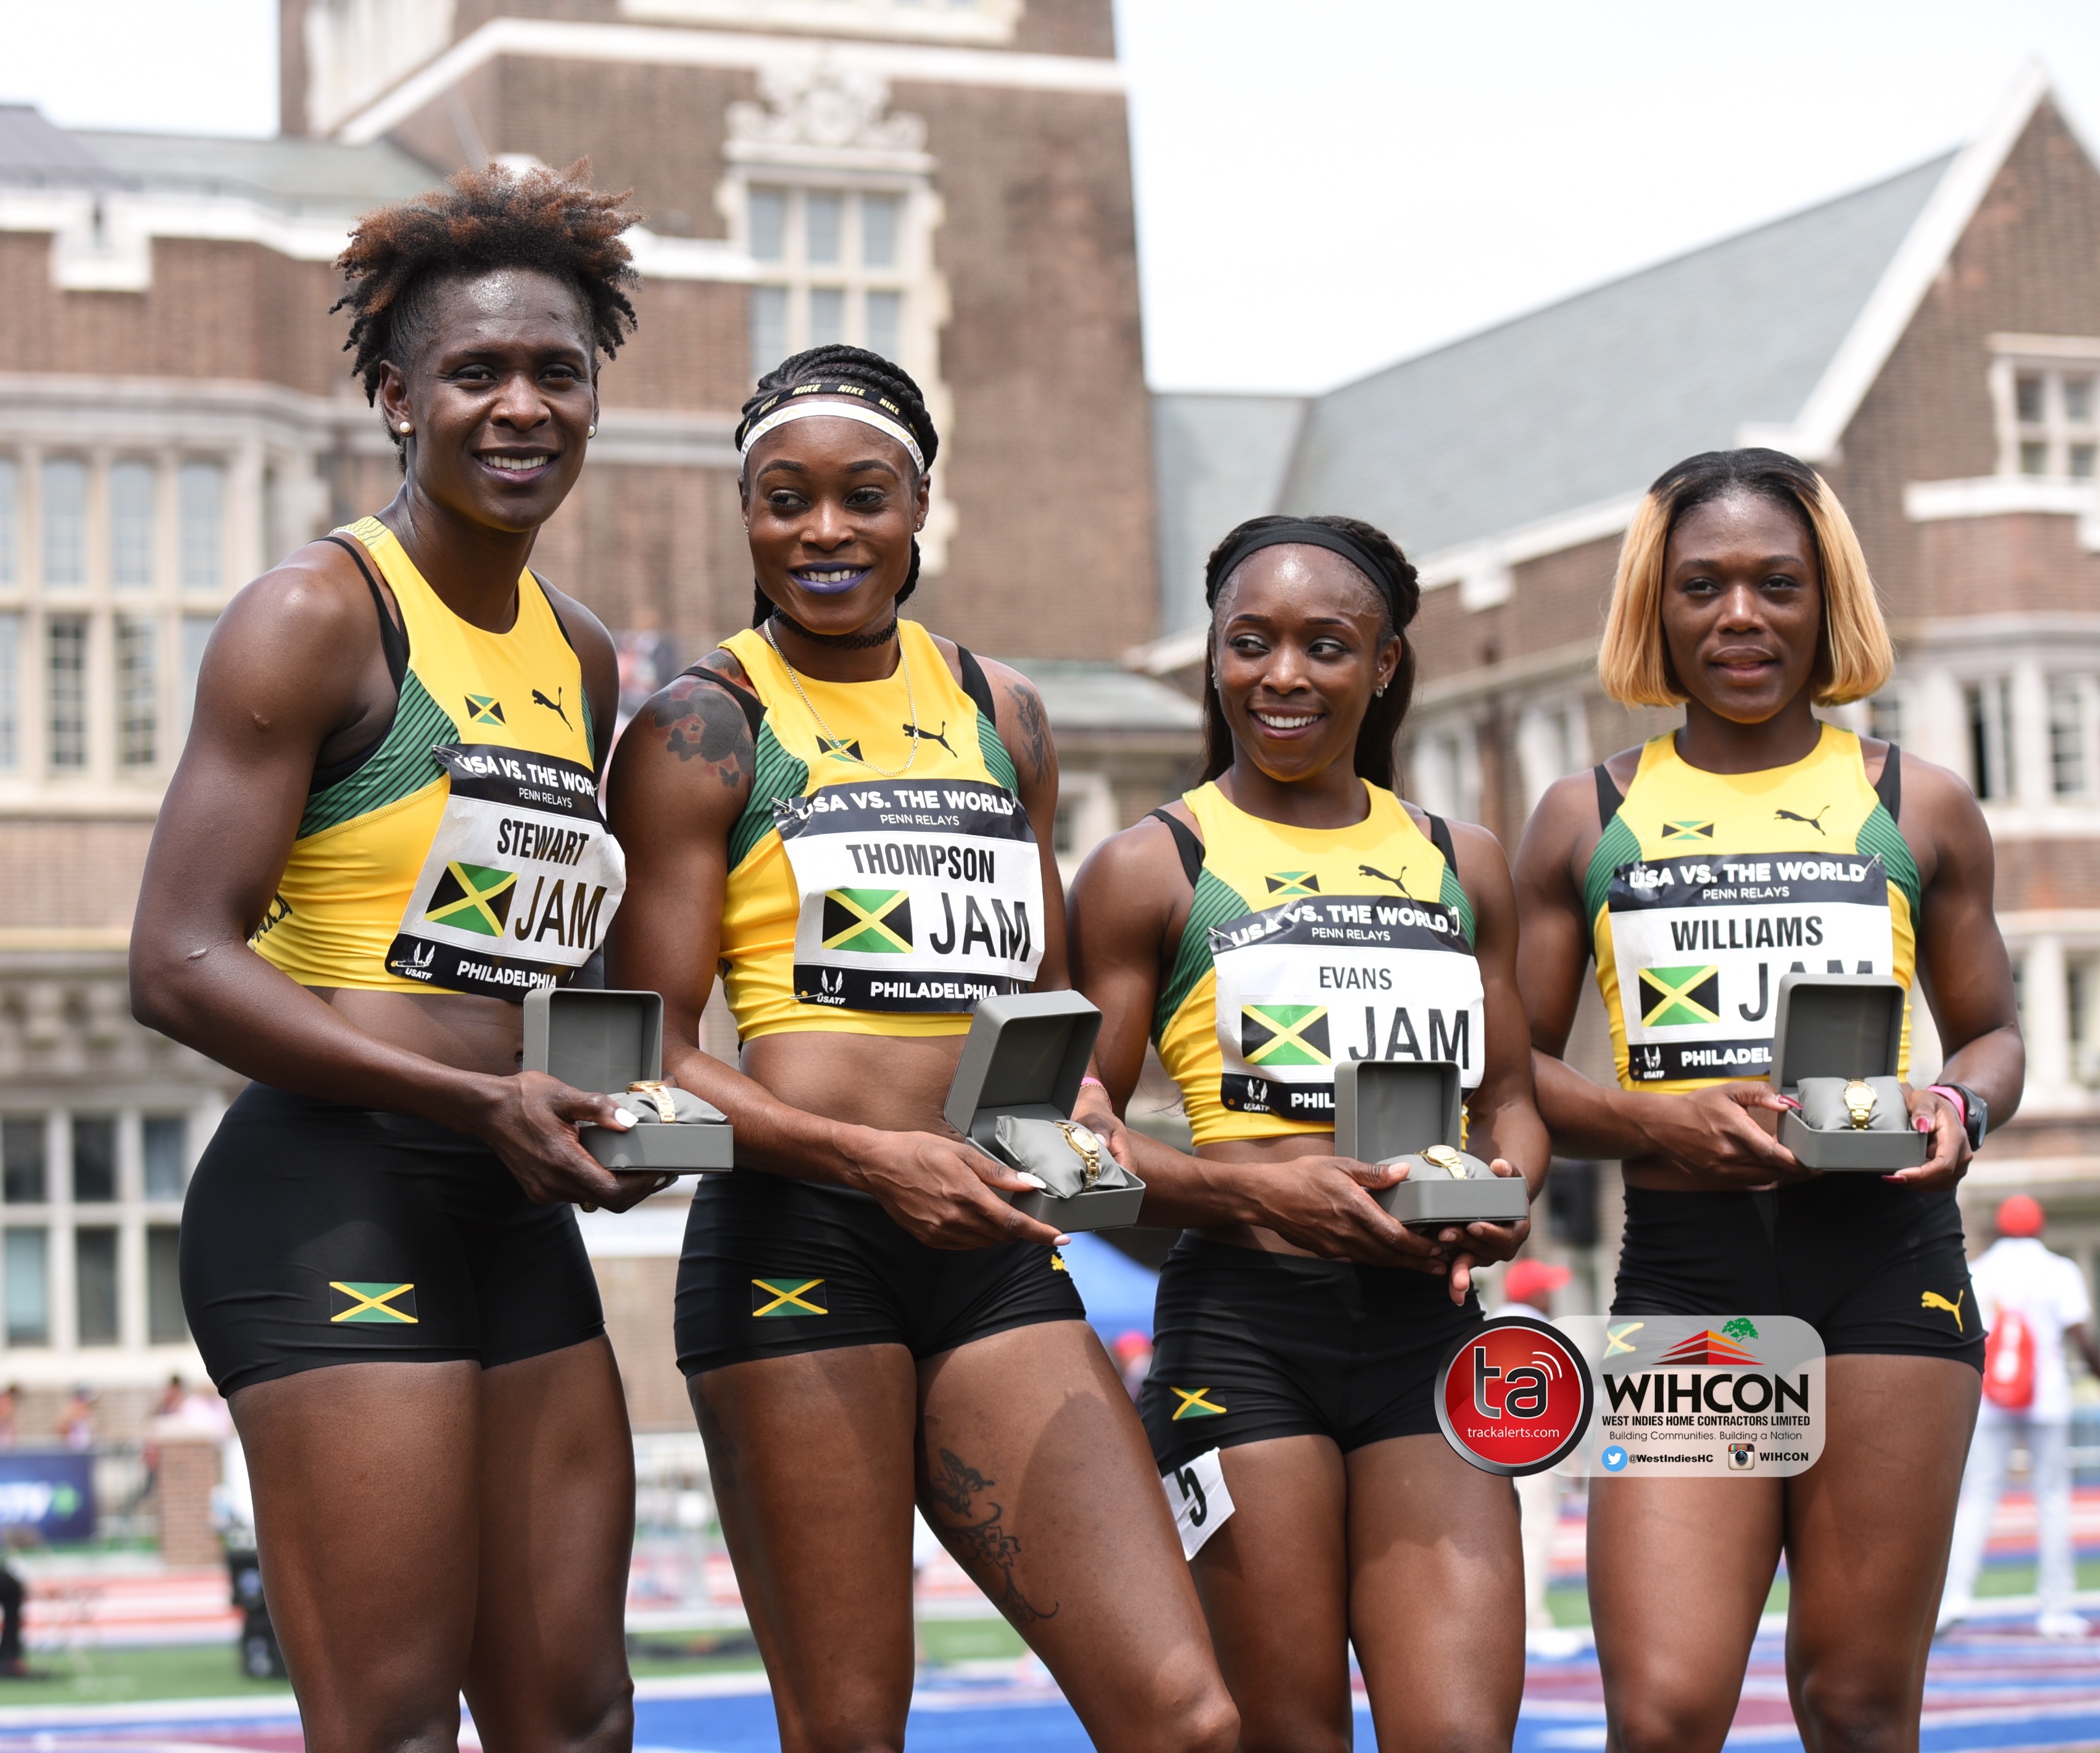 Penn Relays signs Toyota as new title sponsor